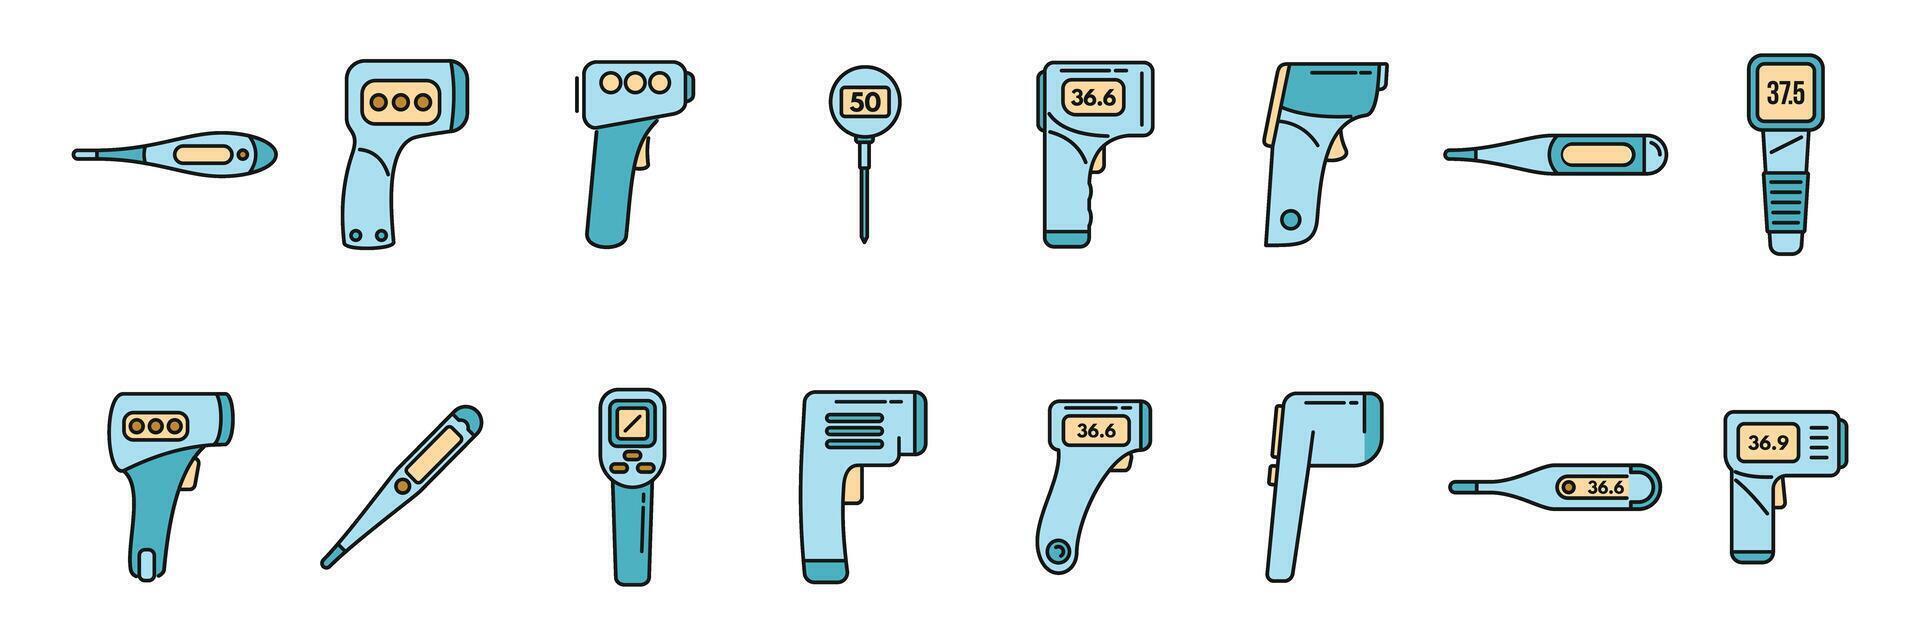 Digital thermometer icons set vector color line